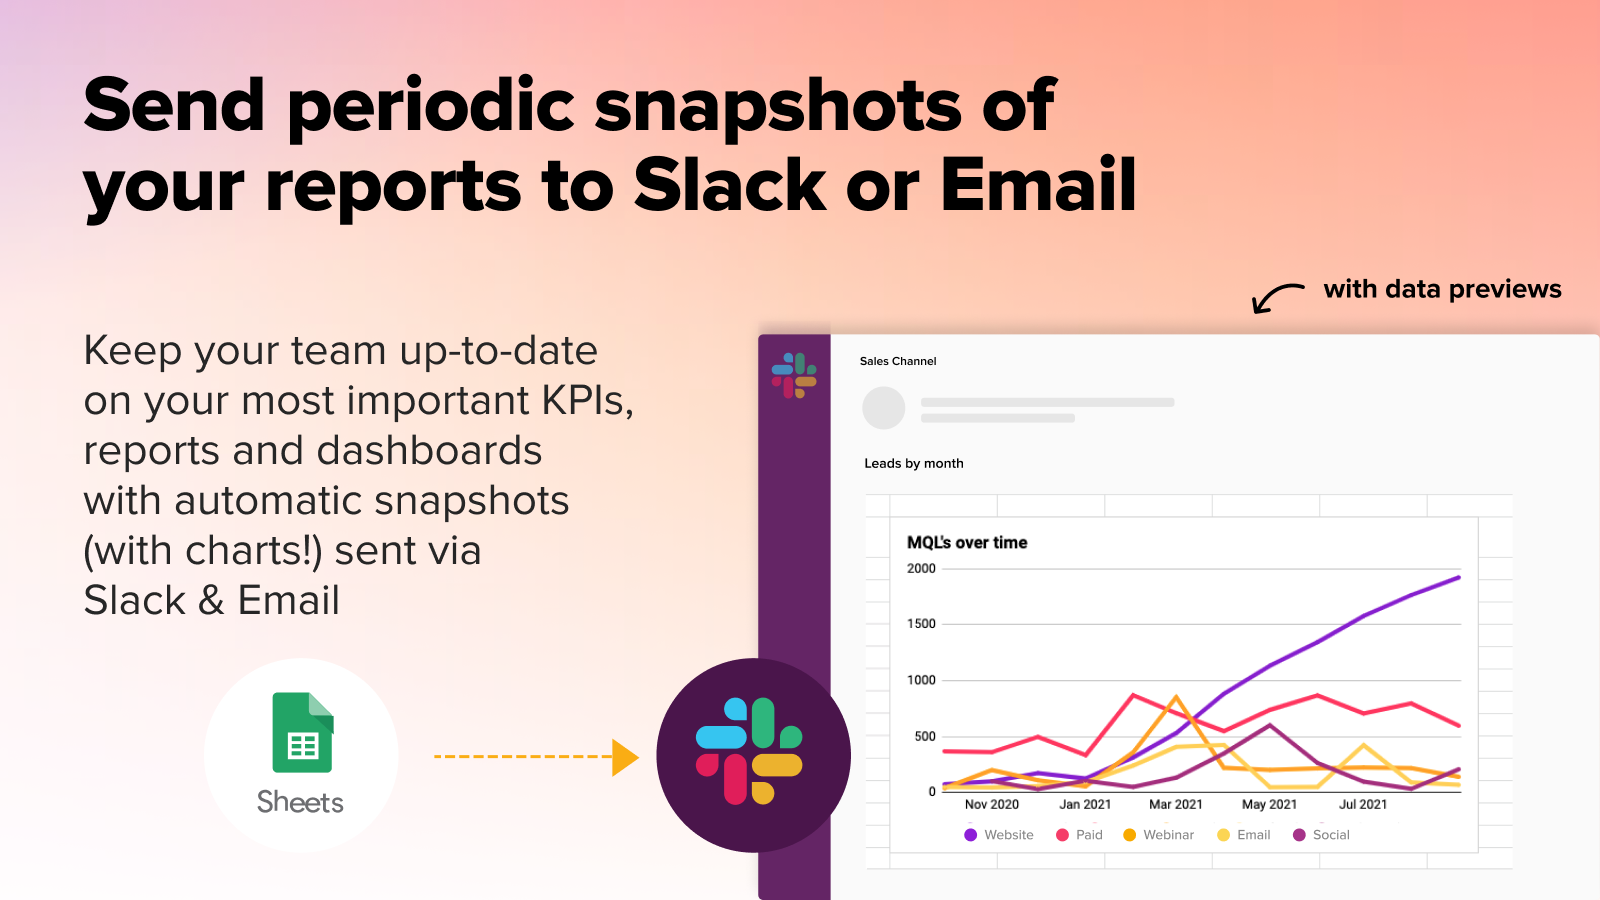 Send periodic snapshots of your reports to Slack or Email